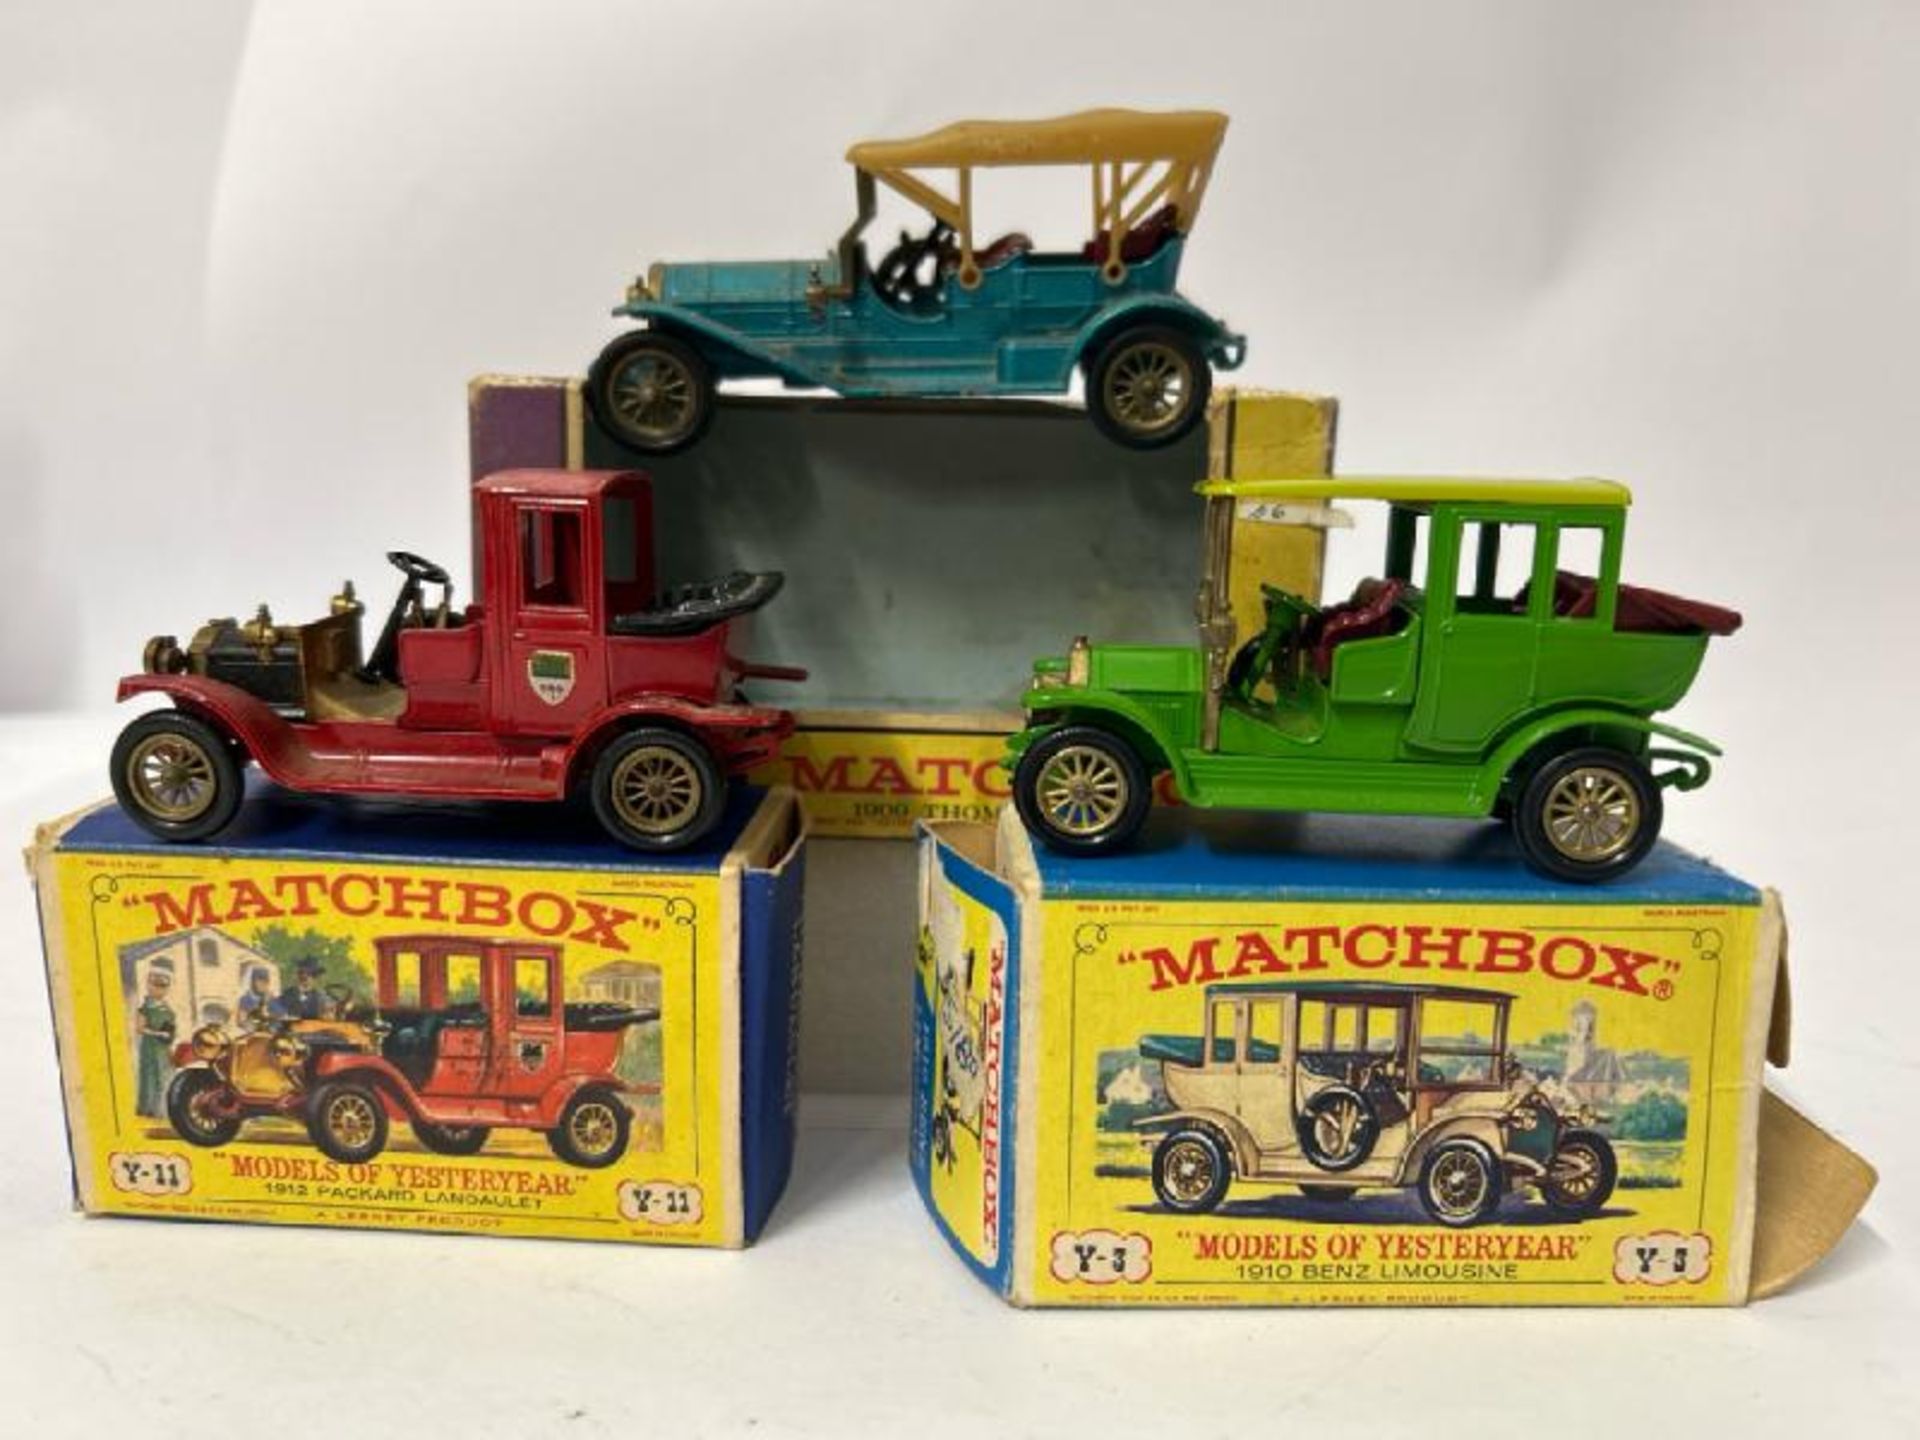 Three Matchbox Models of Yesteryear cars, Y-3 good condition one loose seat, Y-11 missing front